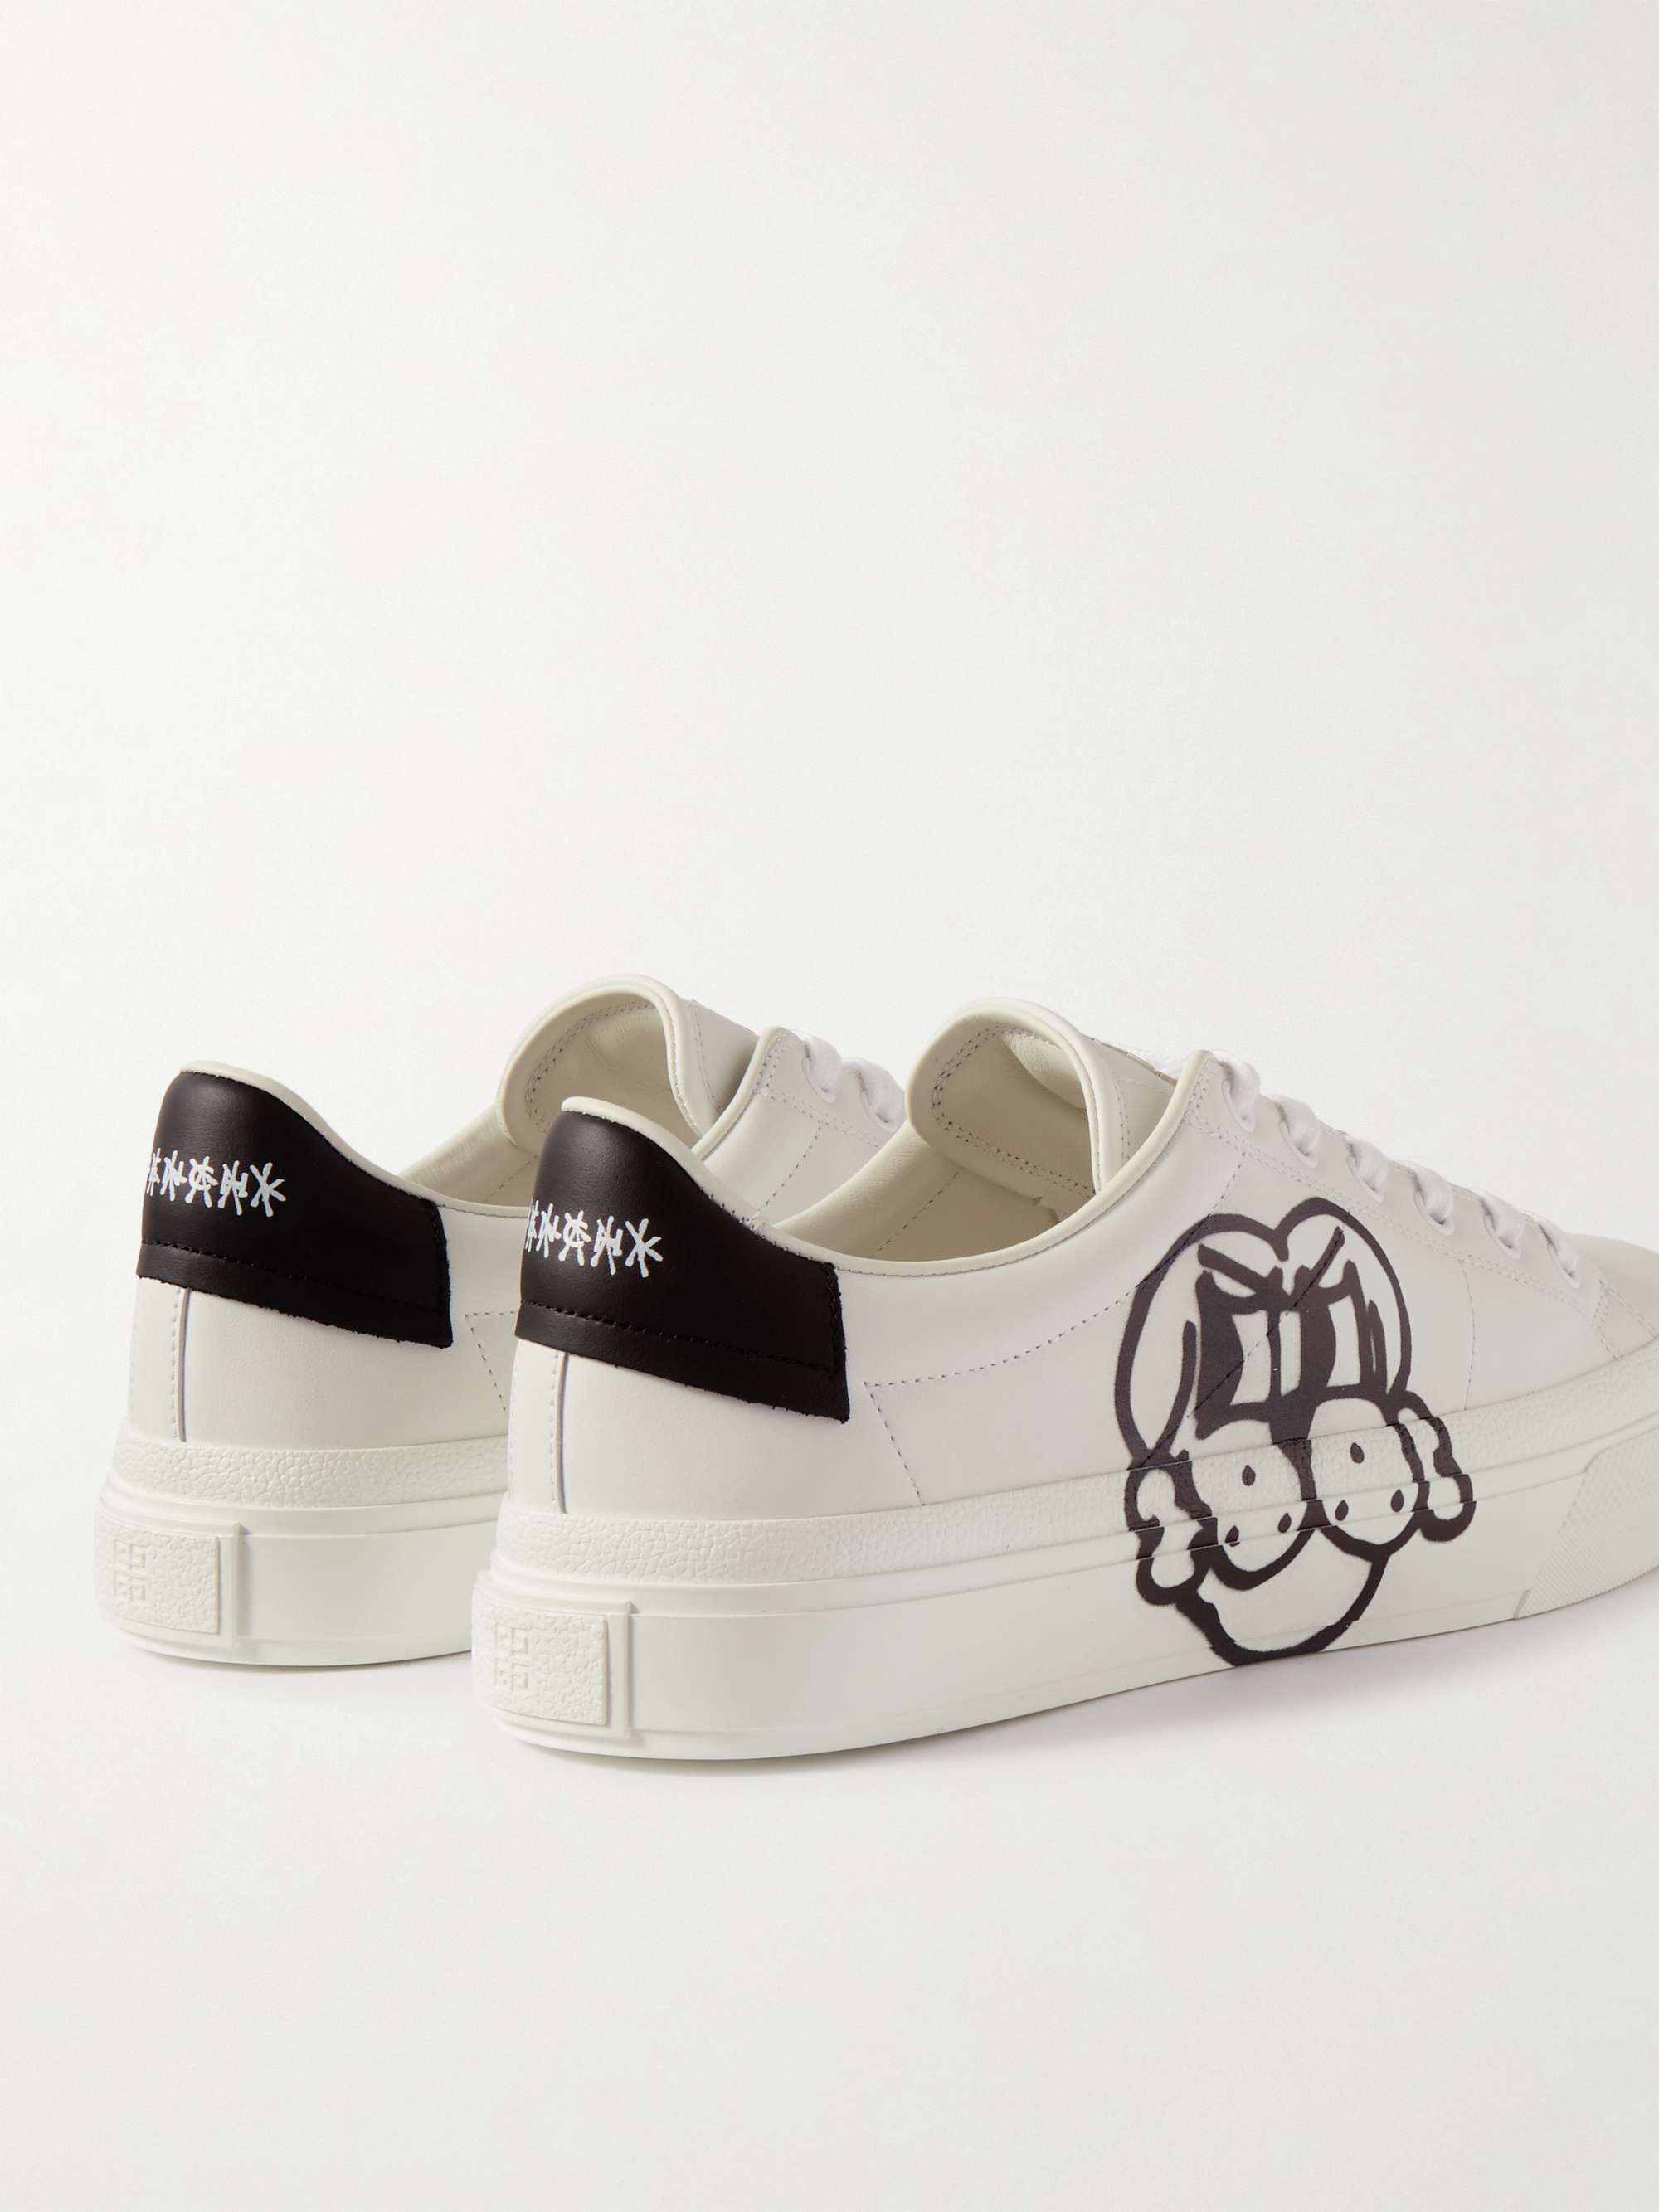 GIVENCHY + Chito City Sport Printed Leather Sneakers | MR PORTER